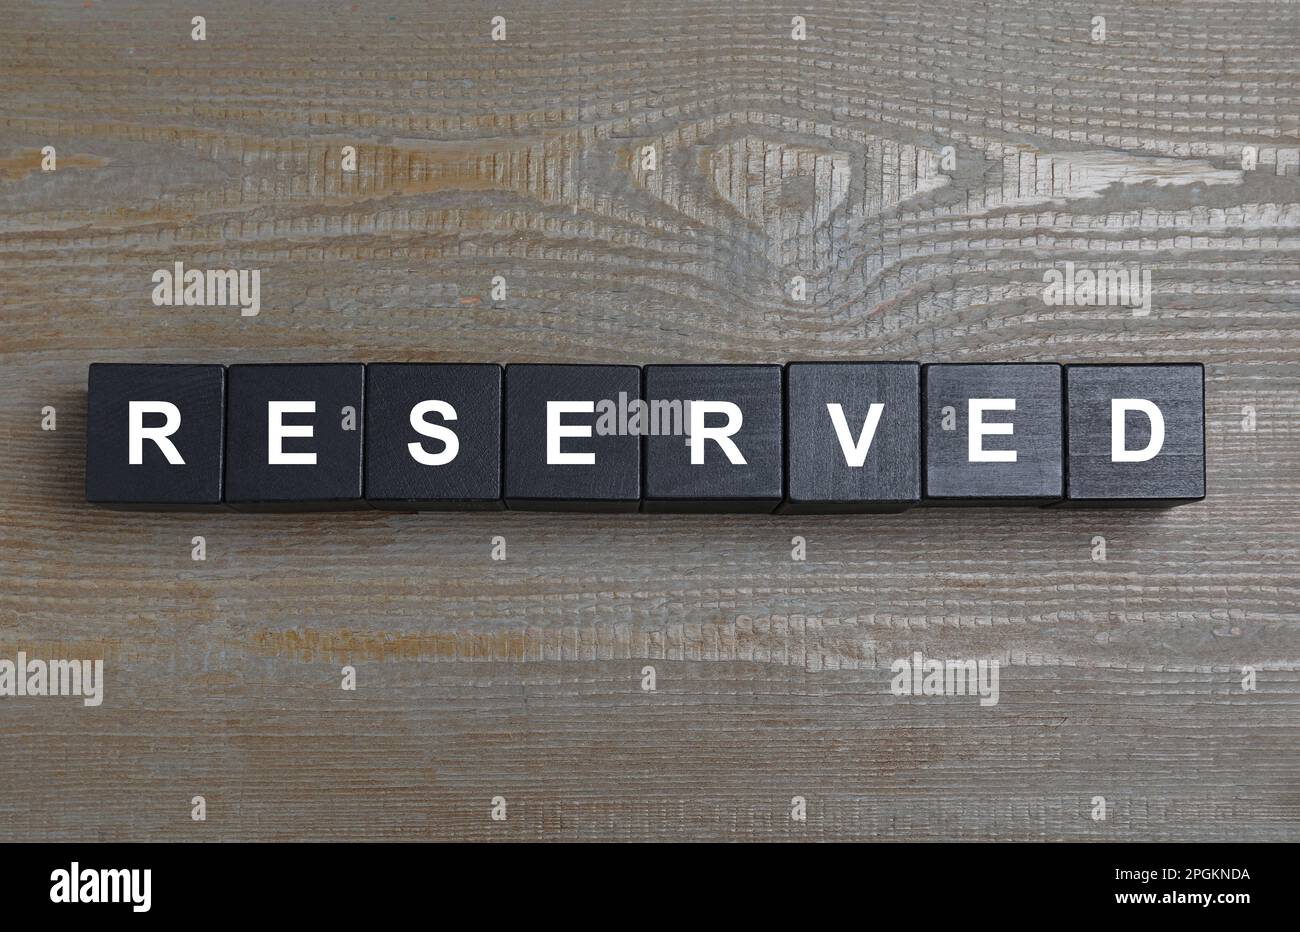 Word RESERVED made with cubes on wooden surface, top view. Table setting element Stock Photo